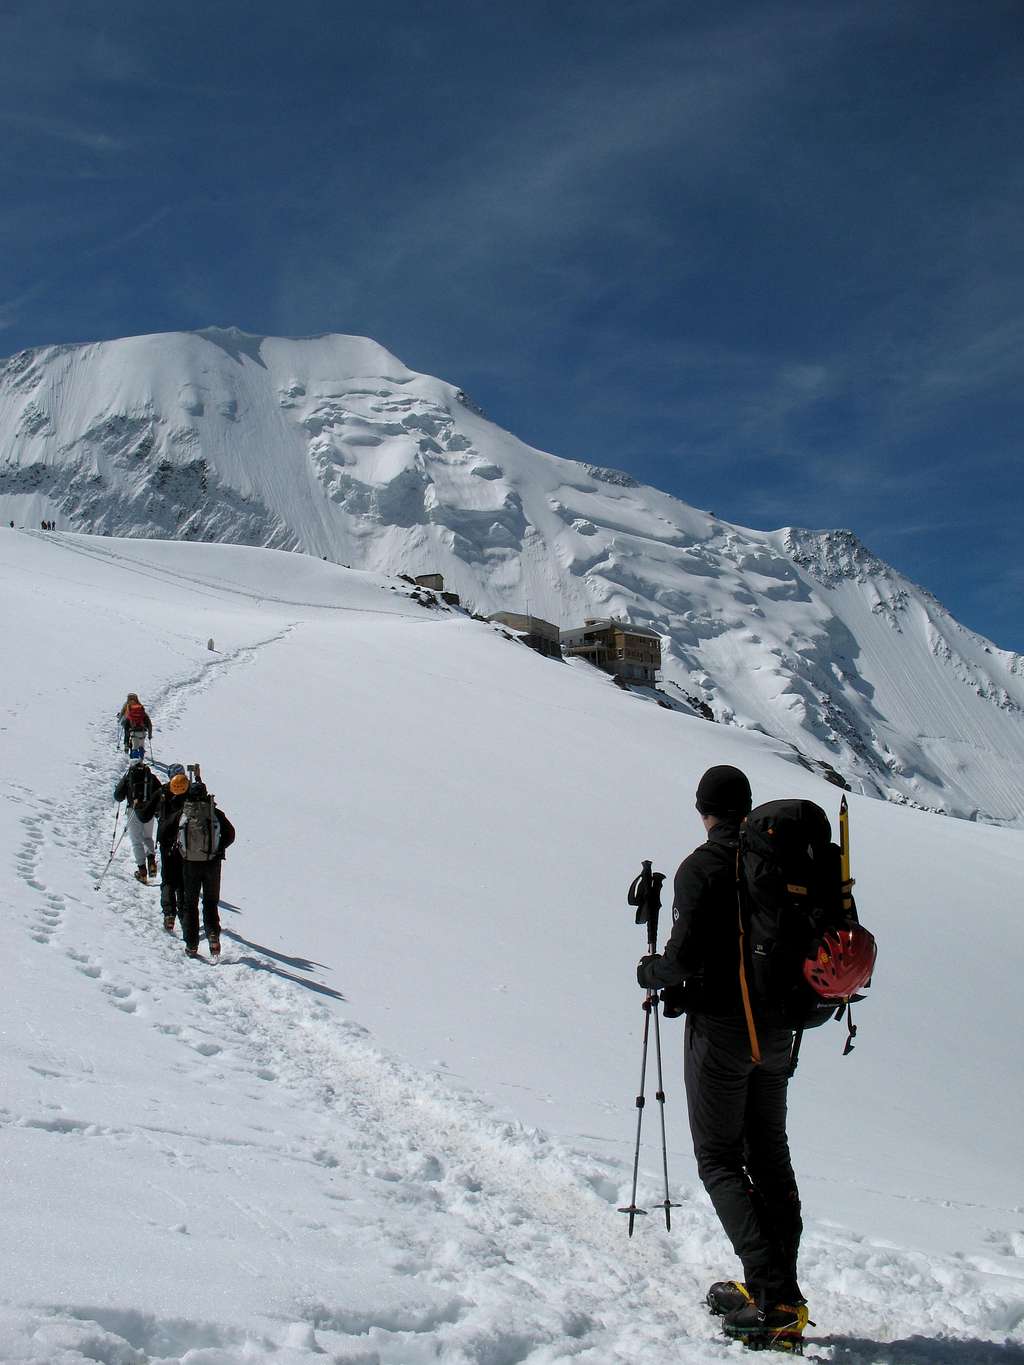 Approaching the Tete Rousse Refuge